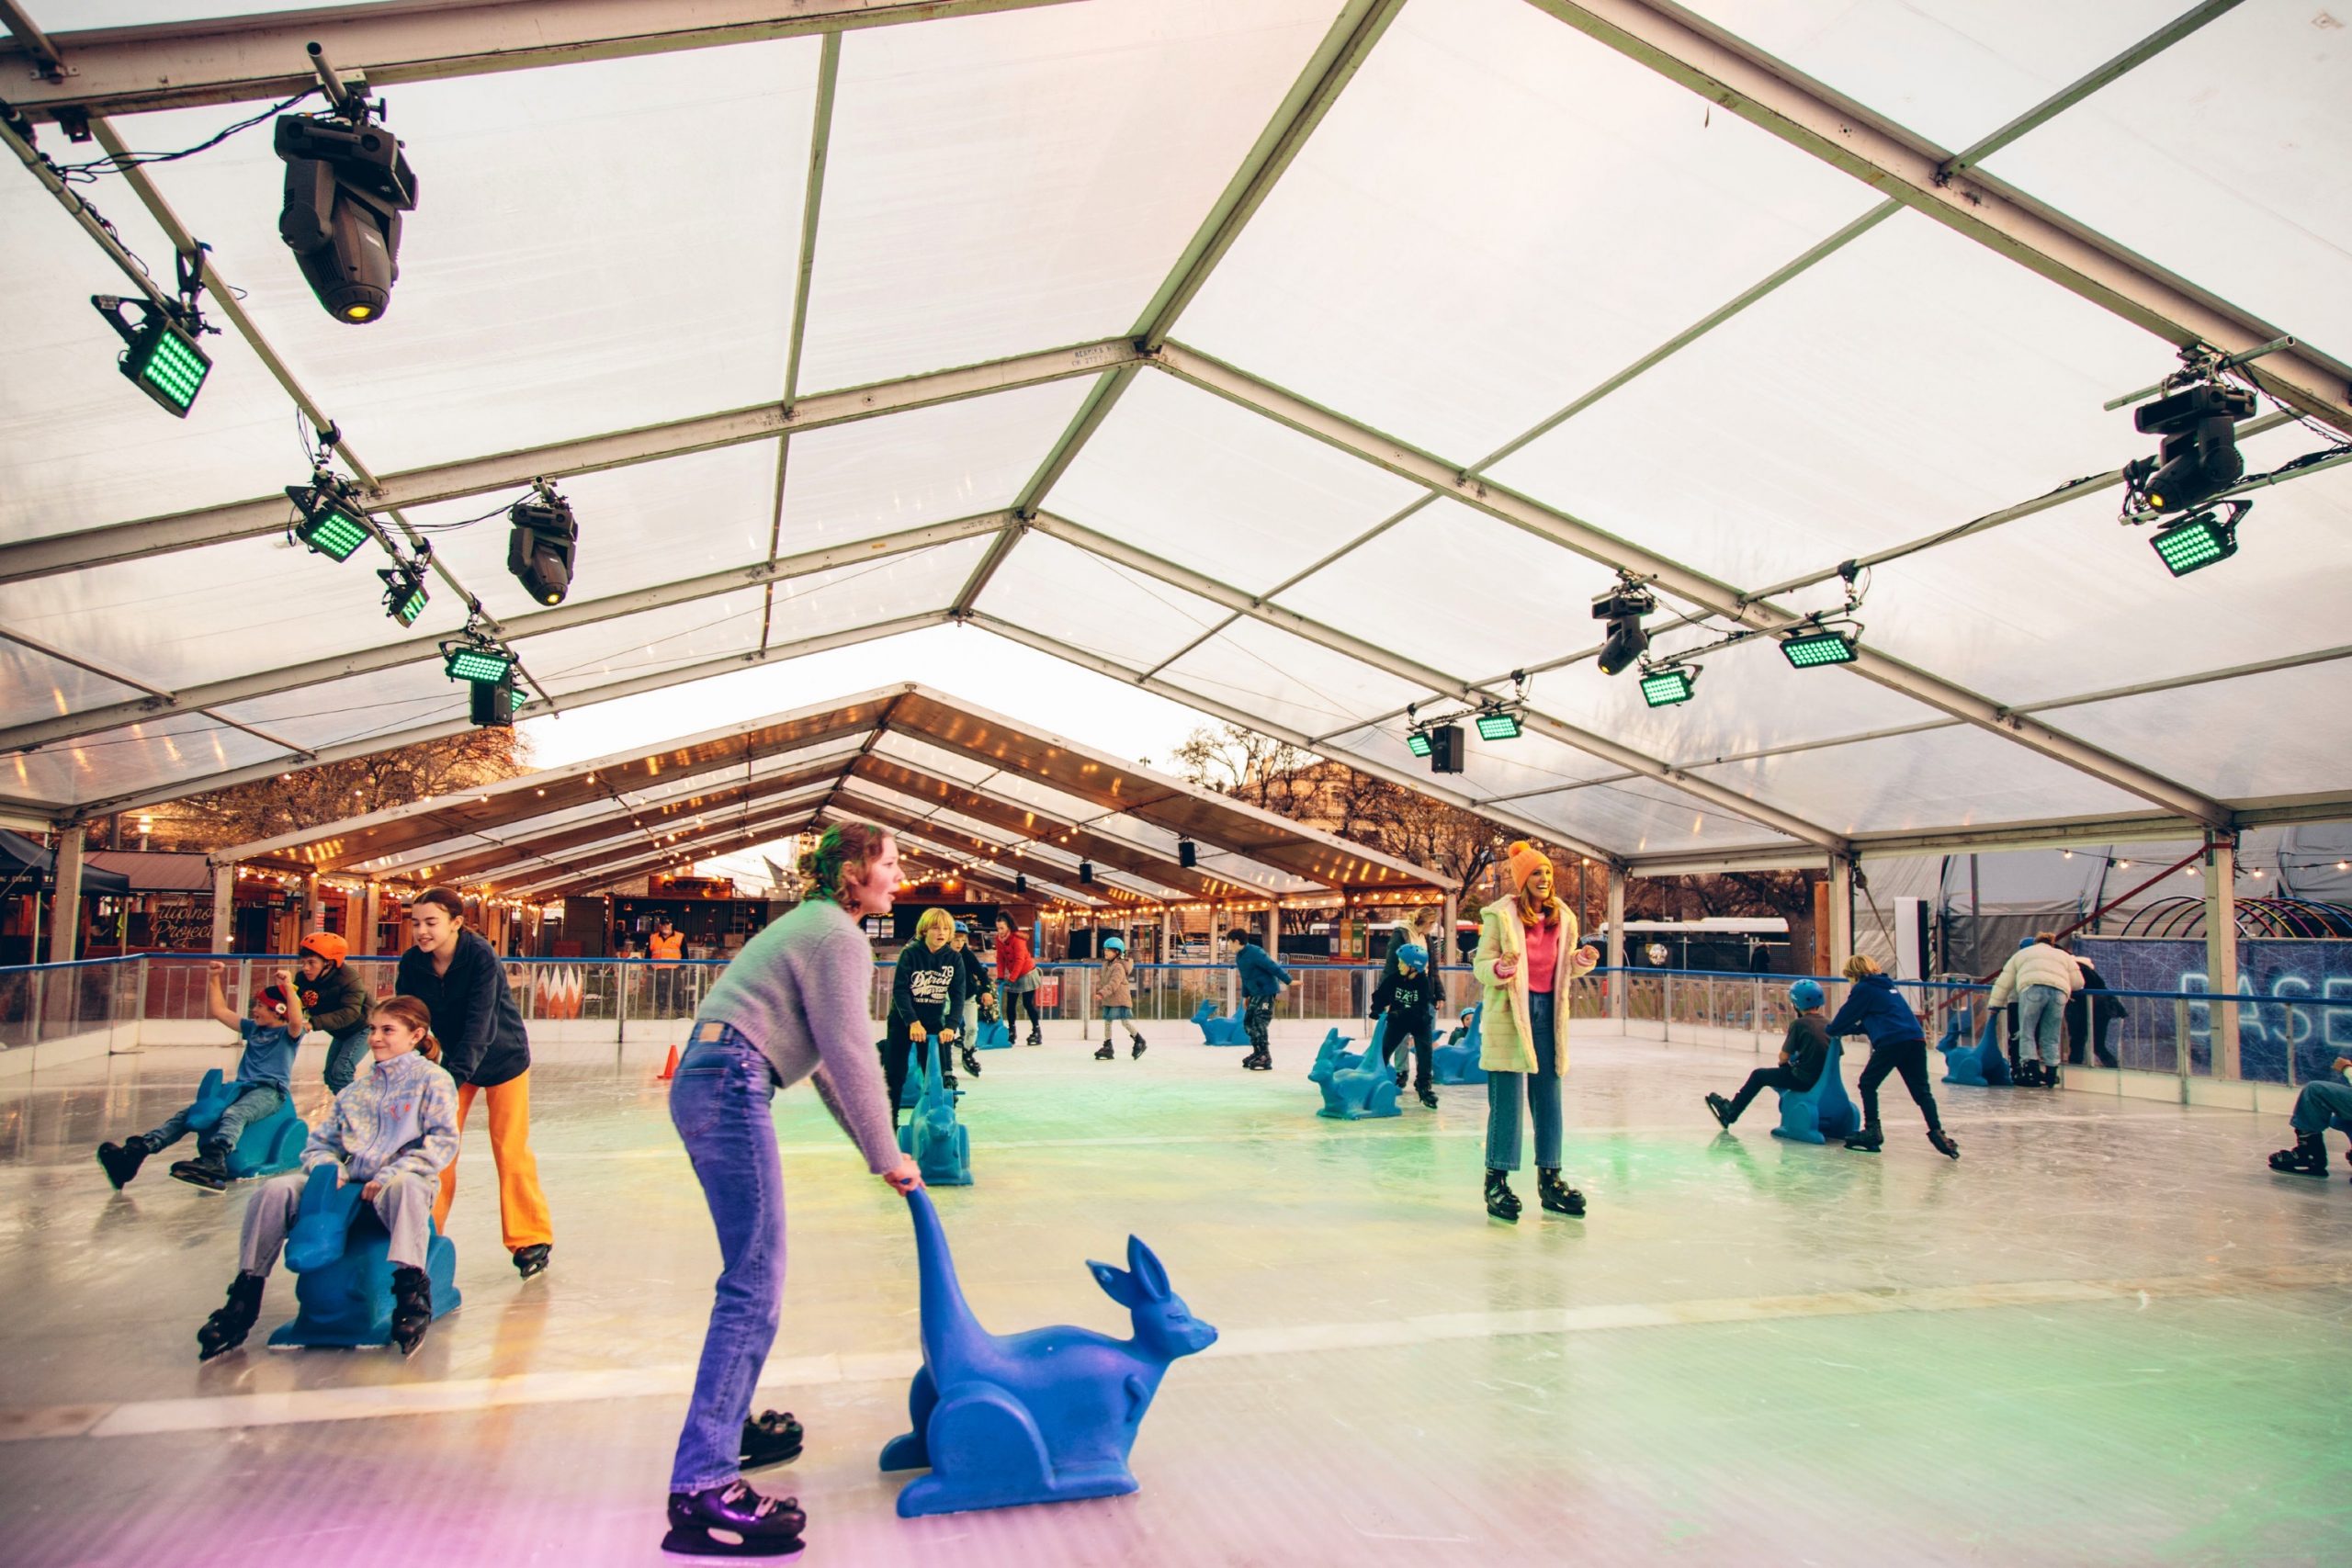 WIN 1 of 25 family passes to ice skate at Illuminate Adelaide’s Base Camp!